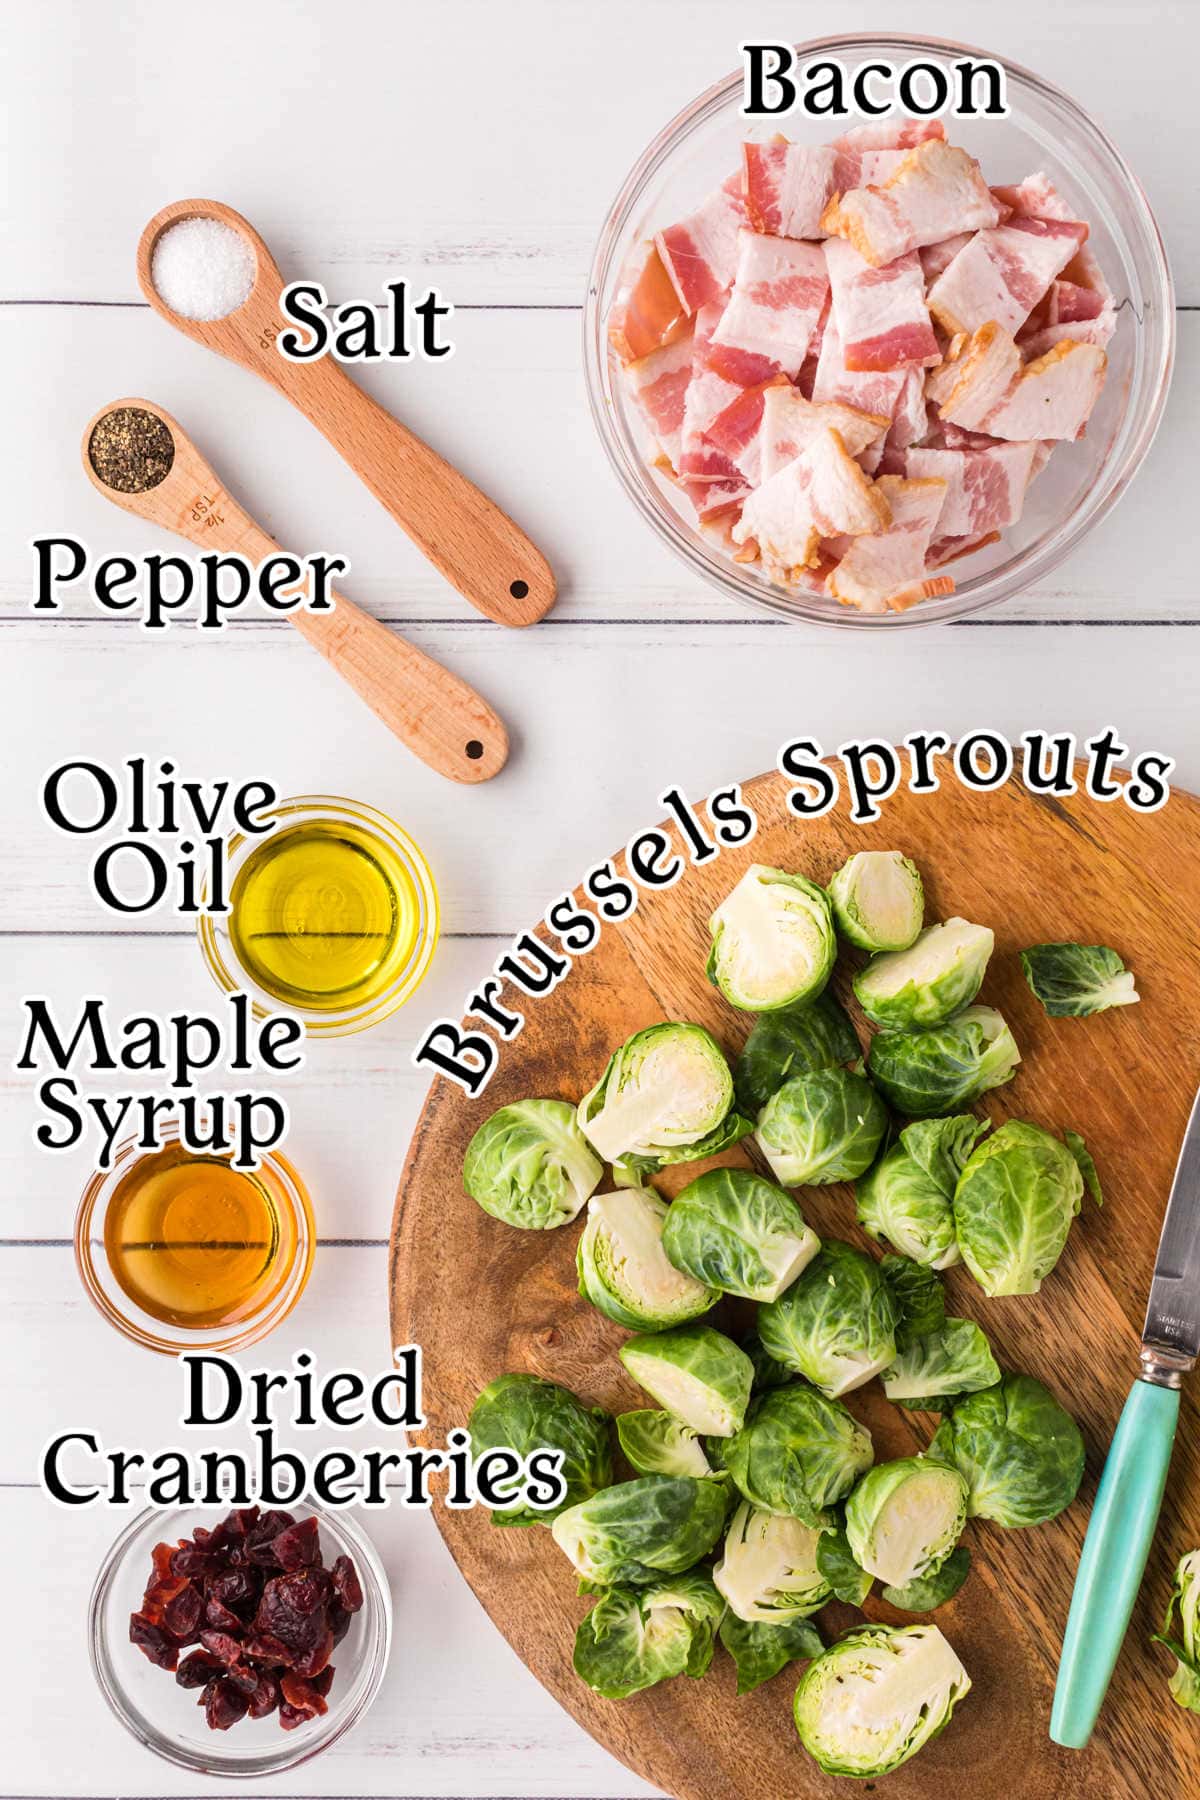 Overhead image with text overlay showing the raw ingredients used to make bacon Brussels sprouts in small bowls and measuring spoons, including Brussels sprouts, bacon, salt, pepper, oil, maple syrup, and cranberries.